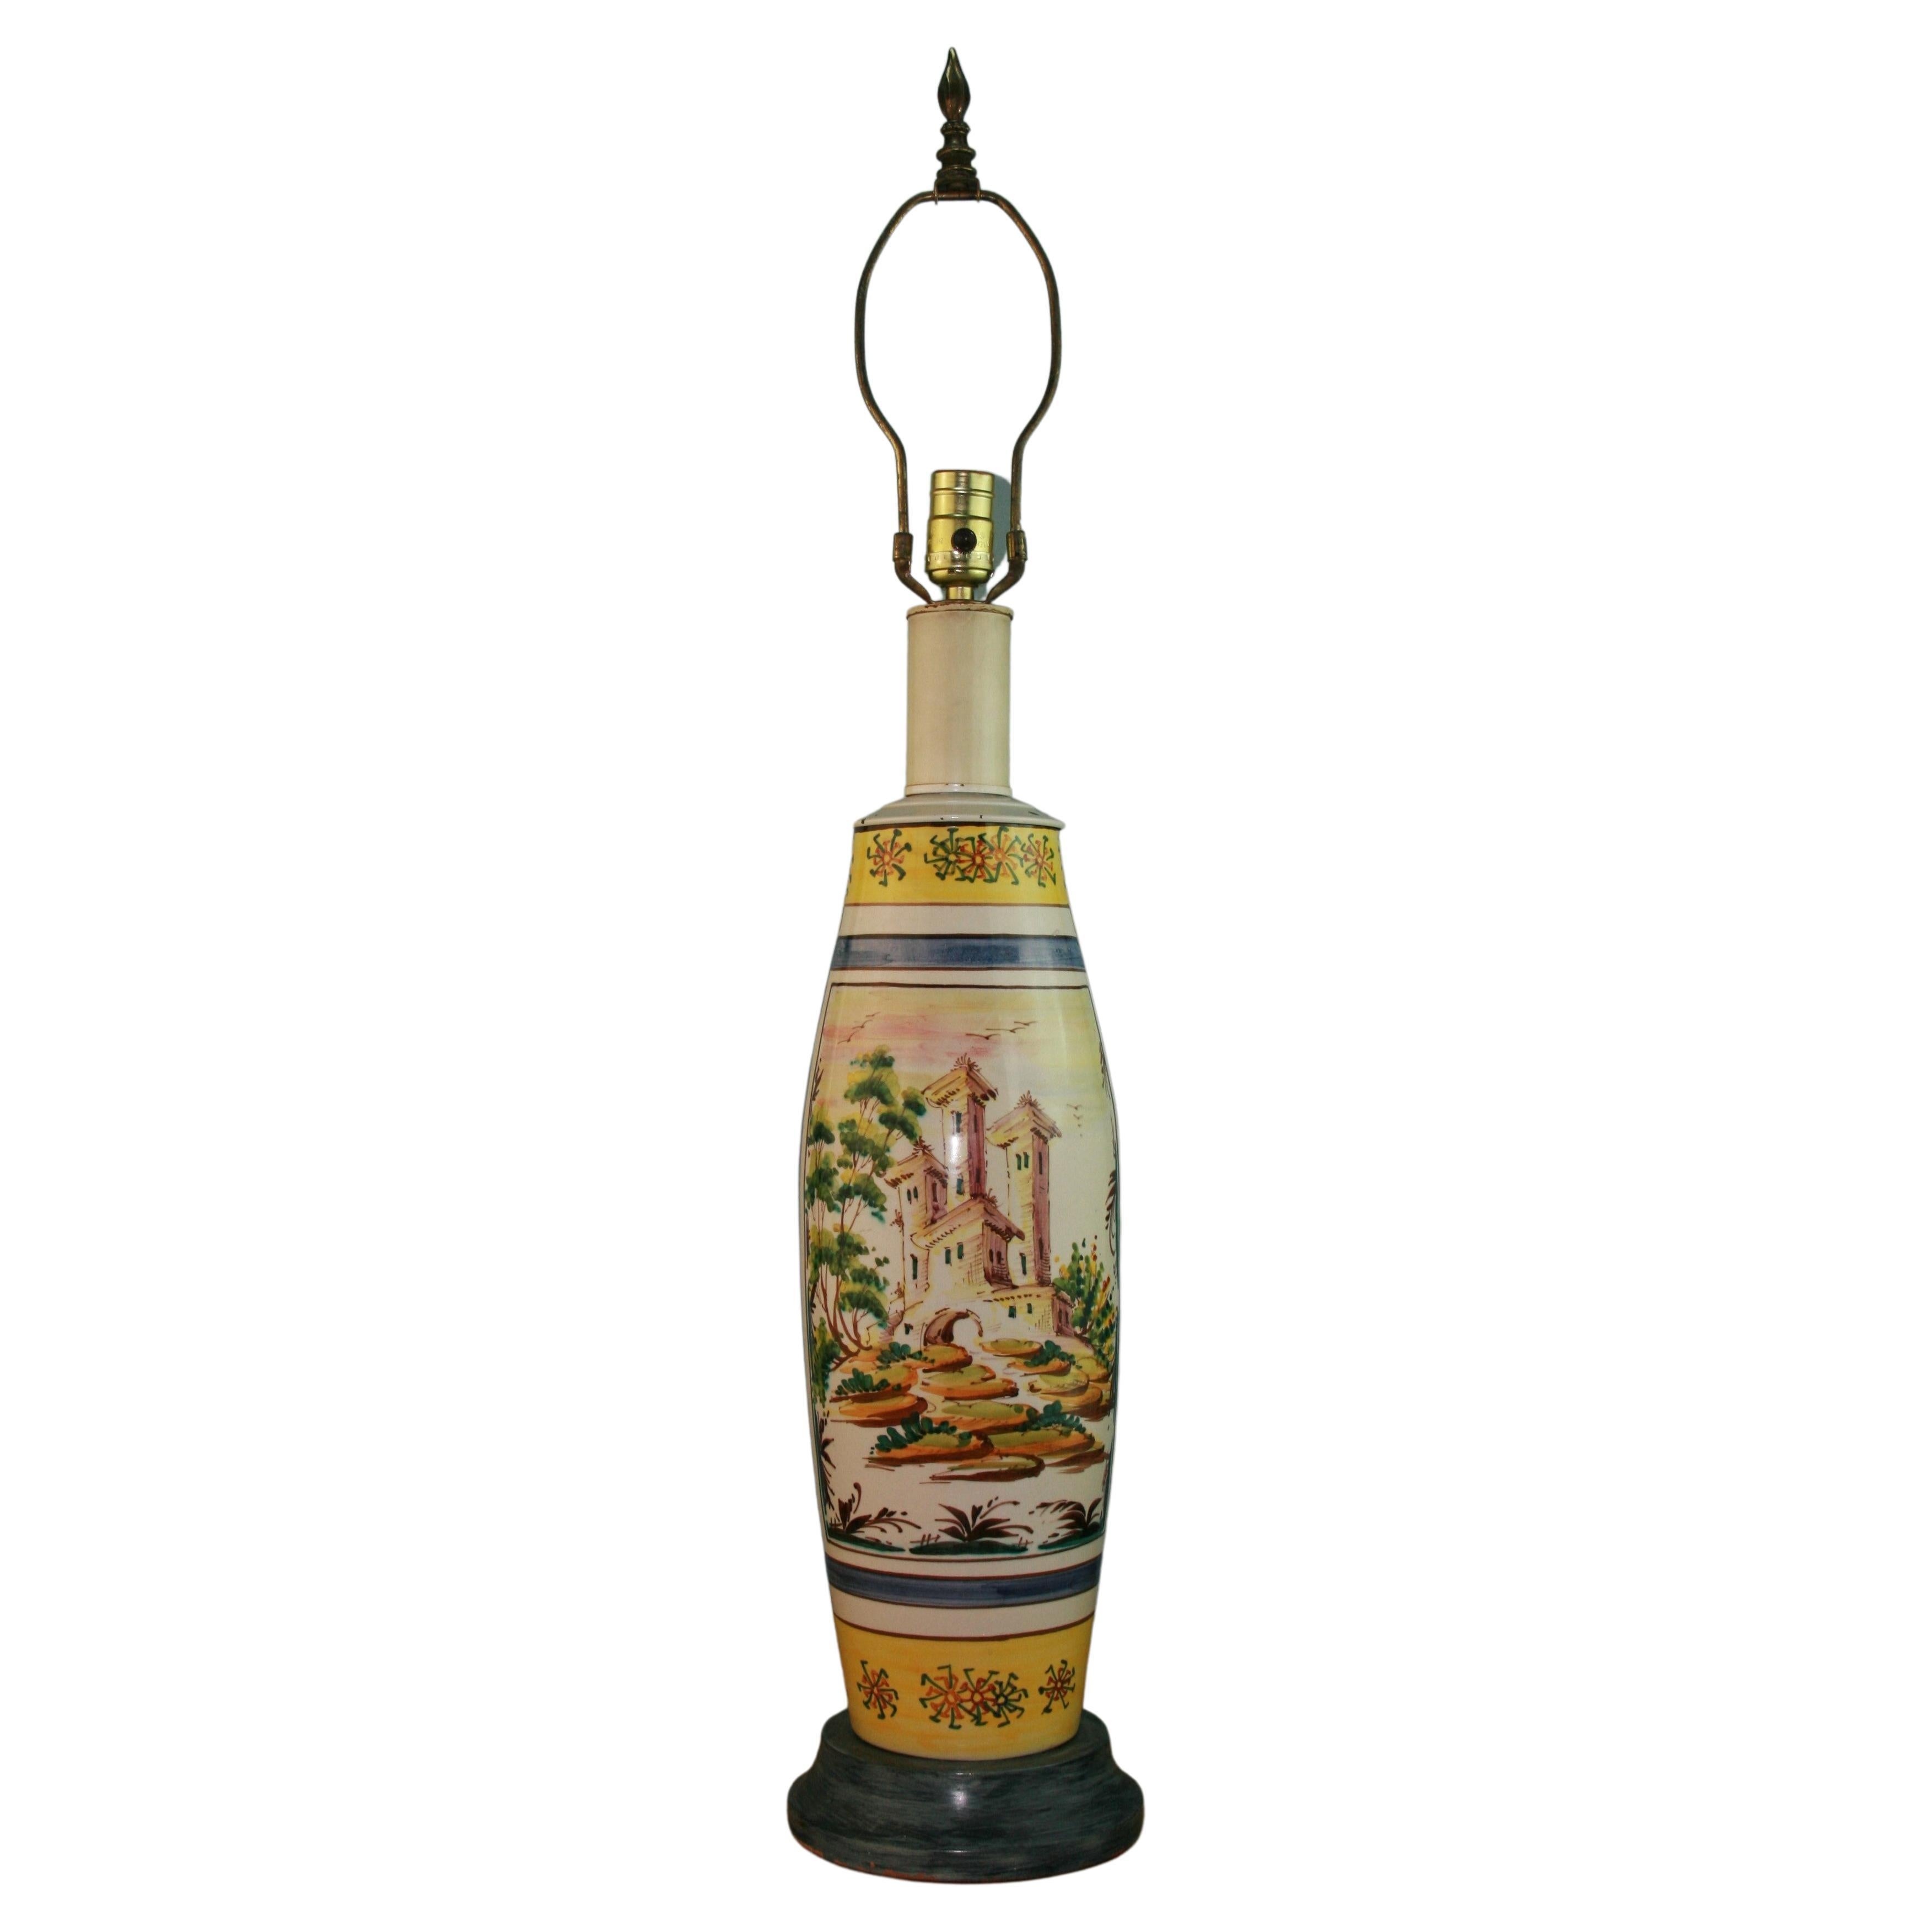 3-953 Italian hand painted 2 sided ceramic lamp on wood base.
One side with figurative painting the other a village scene
Measures: height to top of socket 26